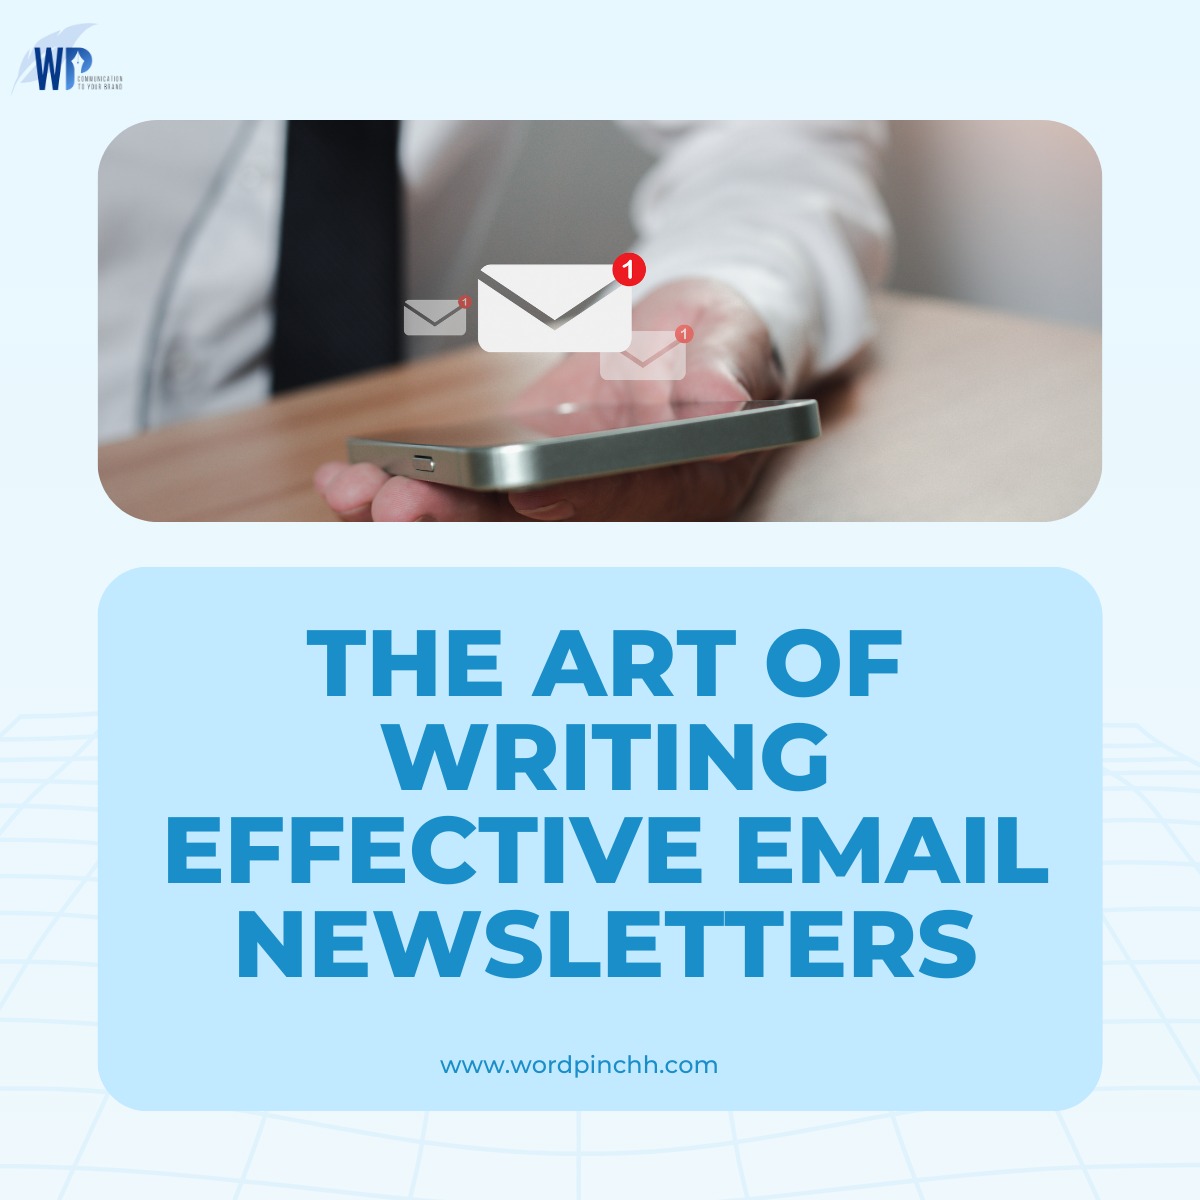 The Art of Writing Effective Email Newsletters wordpinchh